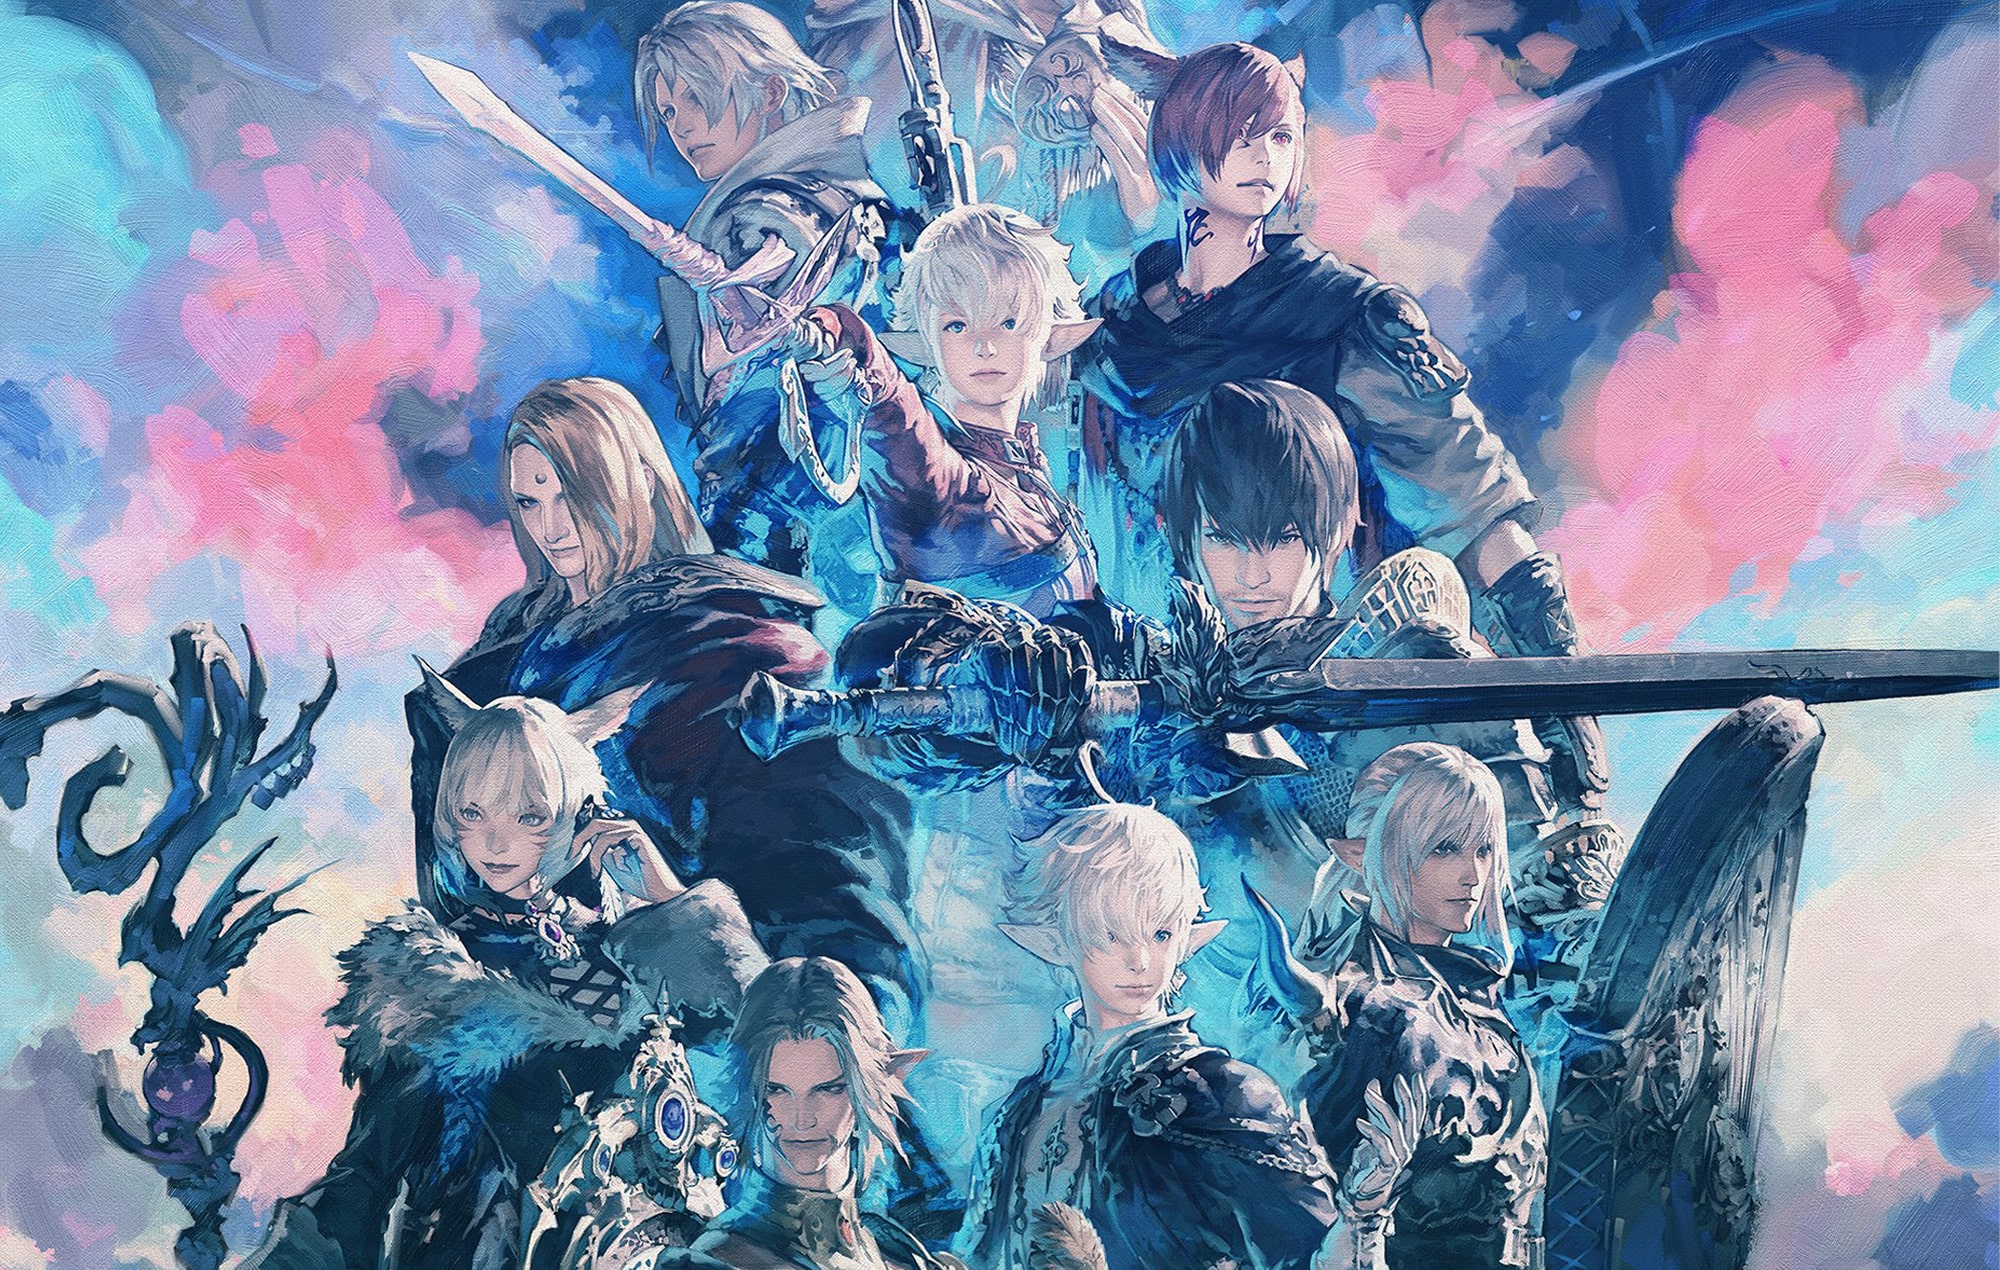 Info About The Next FFXIV Expansion Coming End of February, Says Yoshi-P